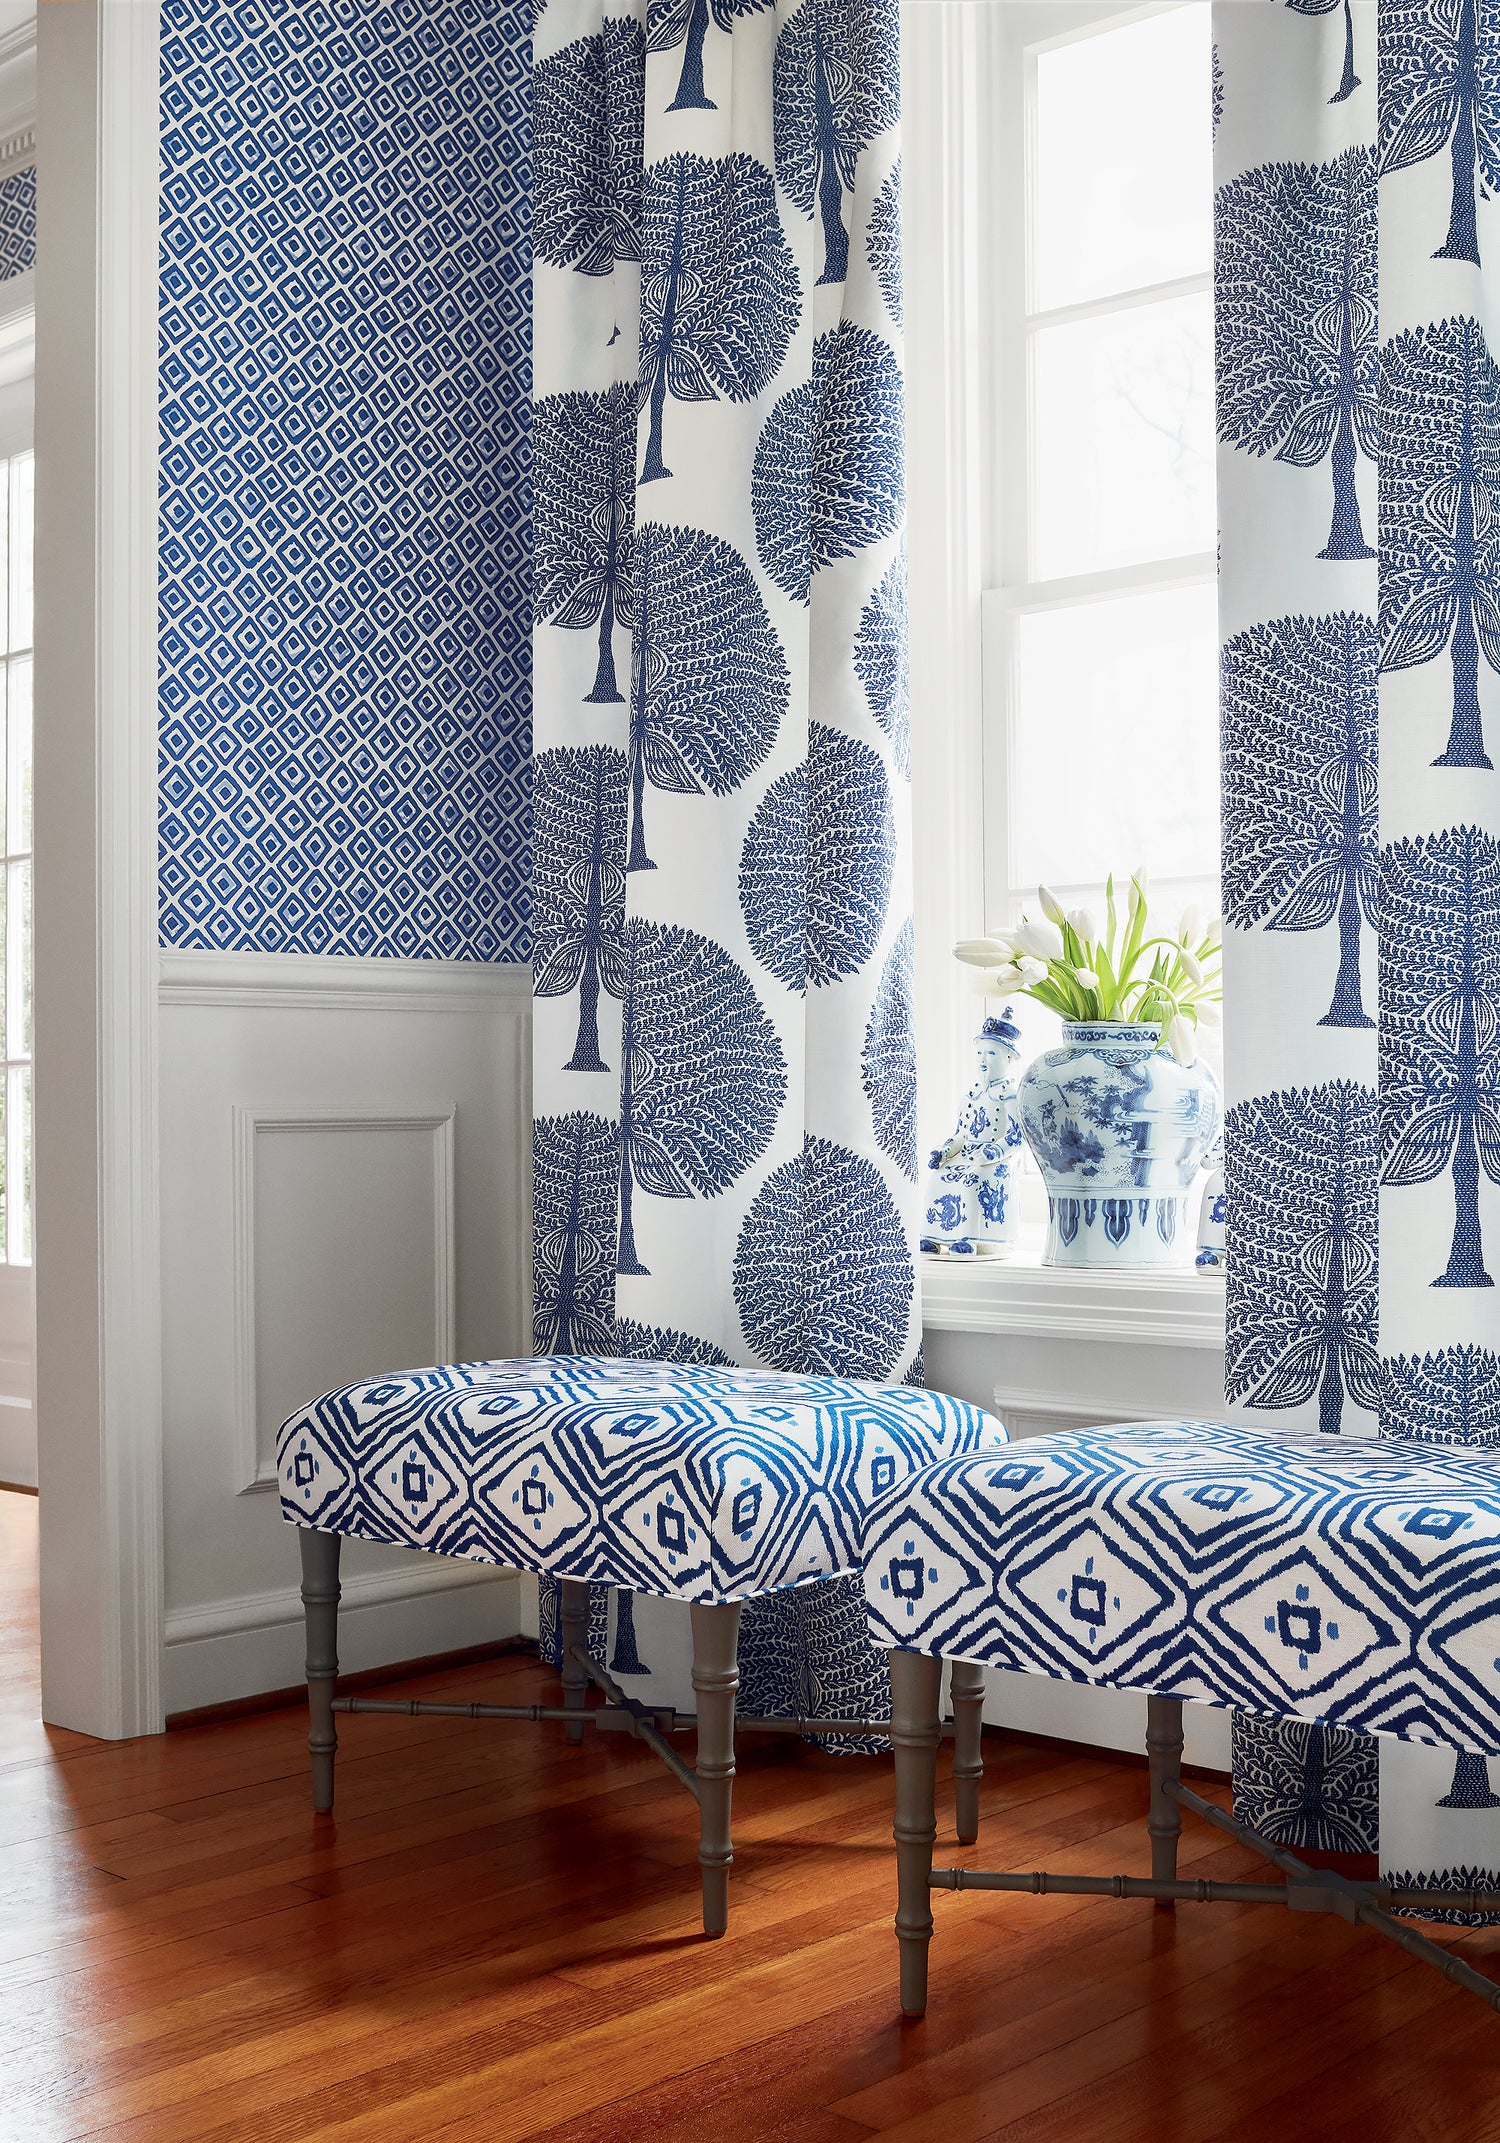 Living room with Drapery curtains made with Thibaut Mulberry Tree fabric in navy color - pattern number F910603